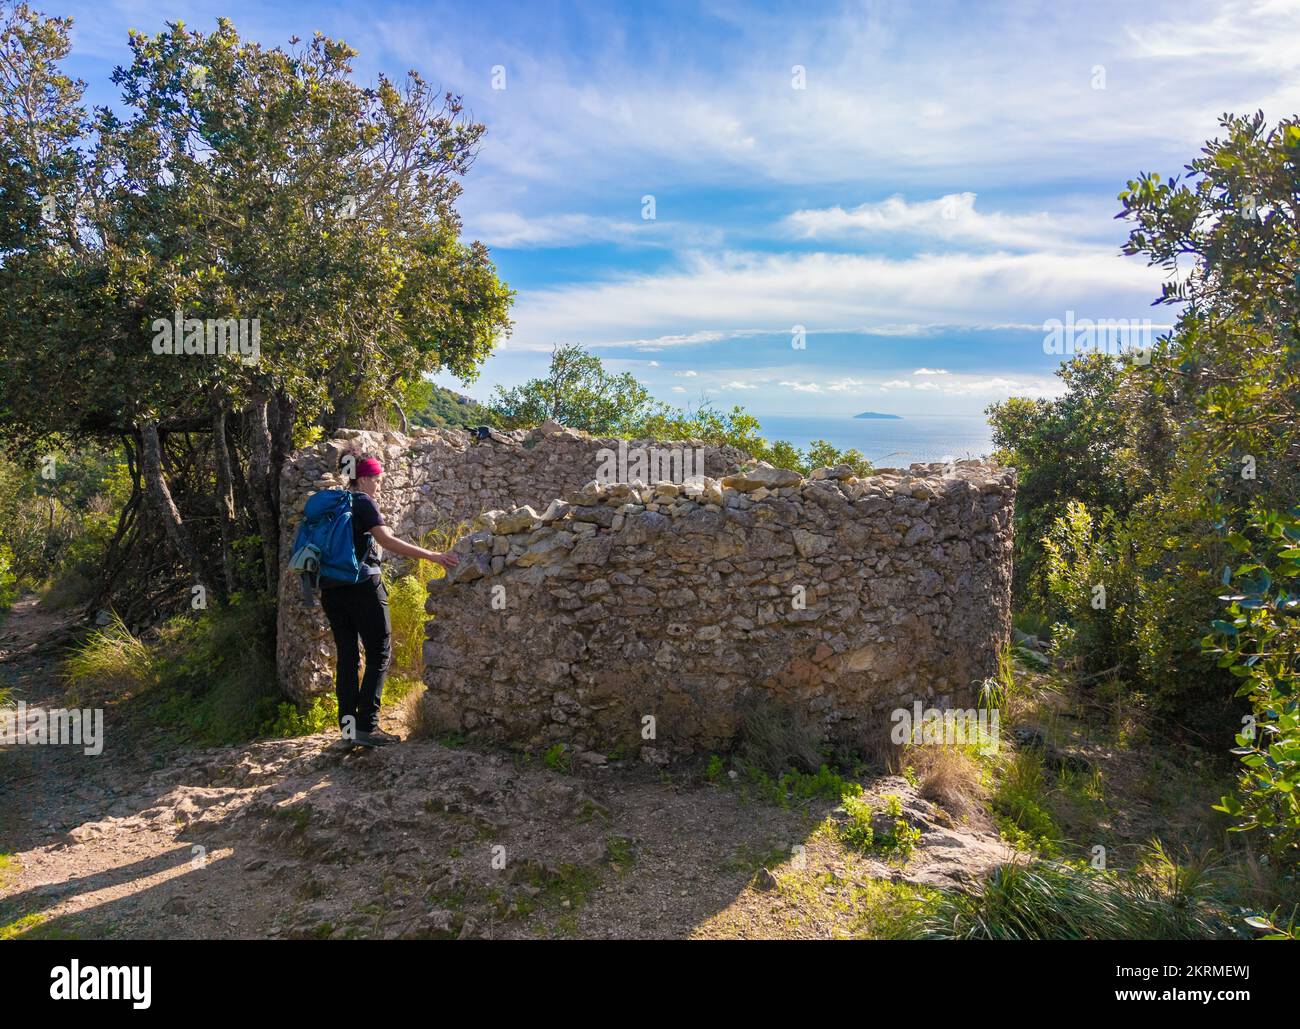 Mount Circeo (Latina, Italy) - The famous mountain on the Tirreno sea, in the province of Latina, very popular with hikers for its beautiful landscape Stock Photo